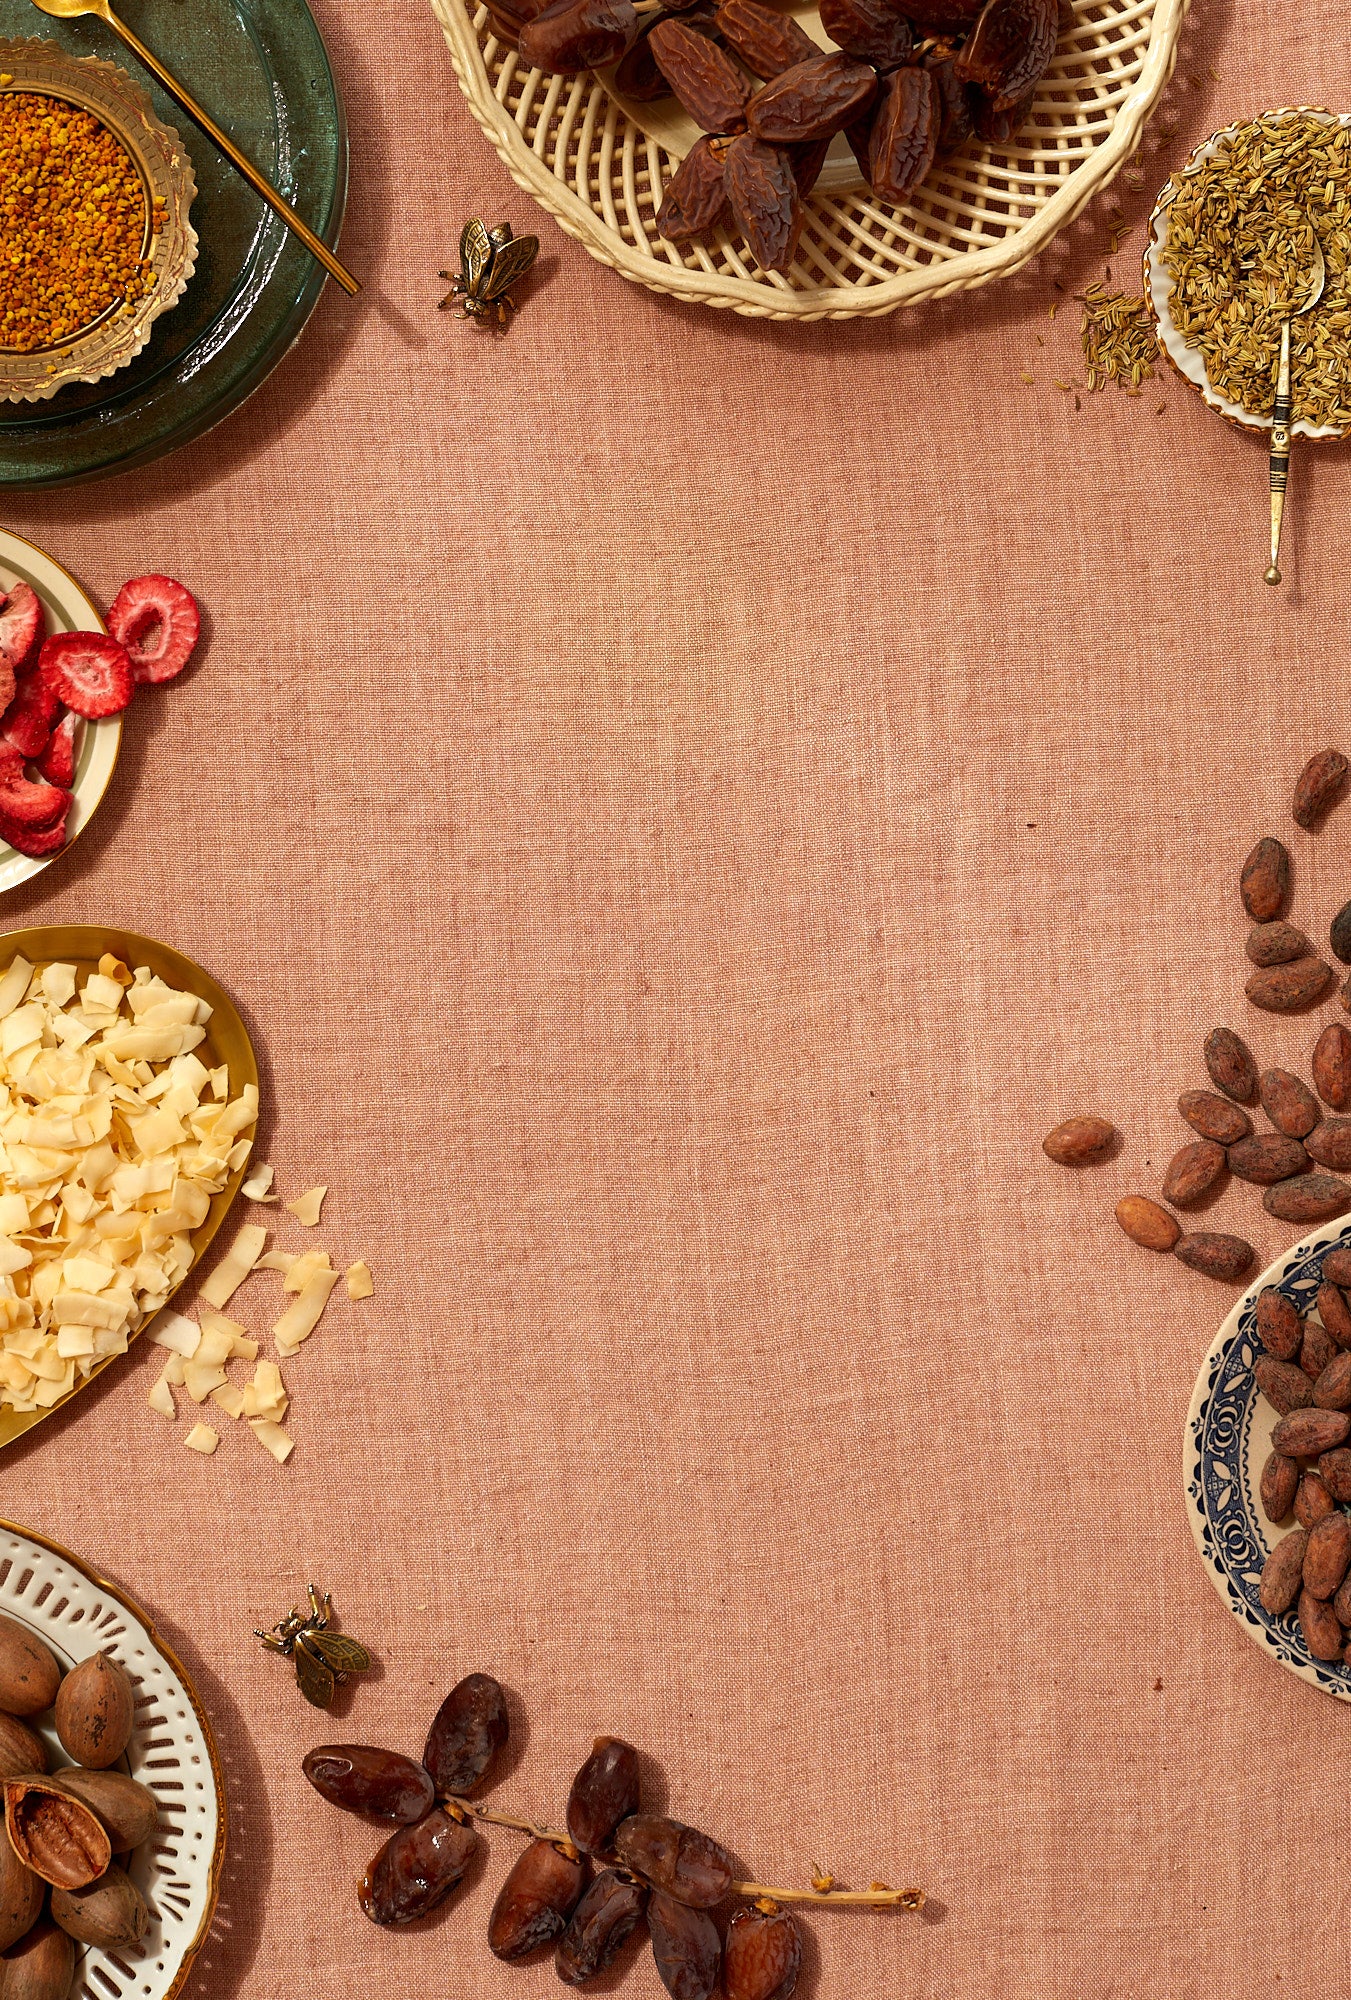 A peach colored linen tablecloth communicates the free shipping promotion. Around the edge of the image is a smattering of dates, nuts, cocnut, cacao beans, freeze dried strawberries, and pee pollen in mix-and-matched vintage bowls. 